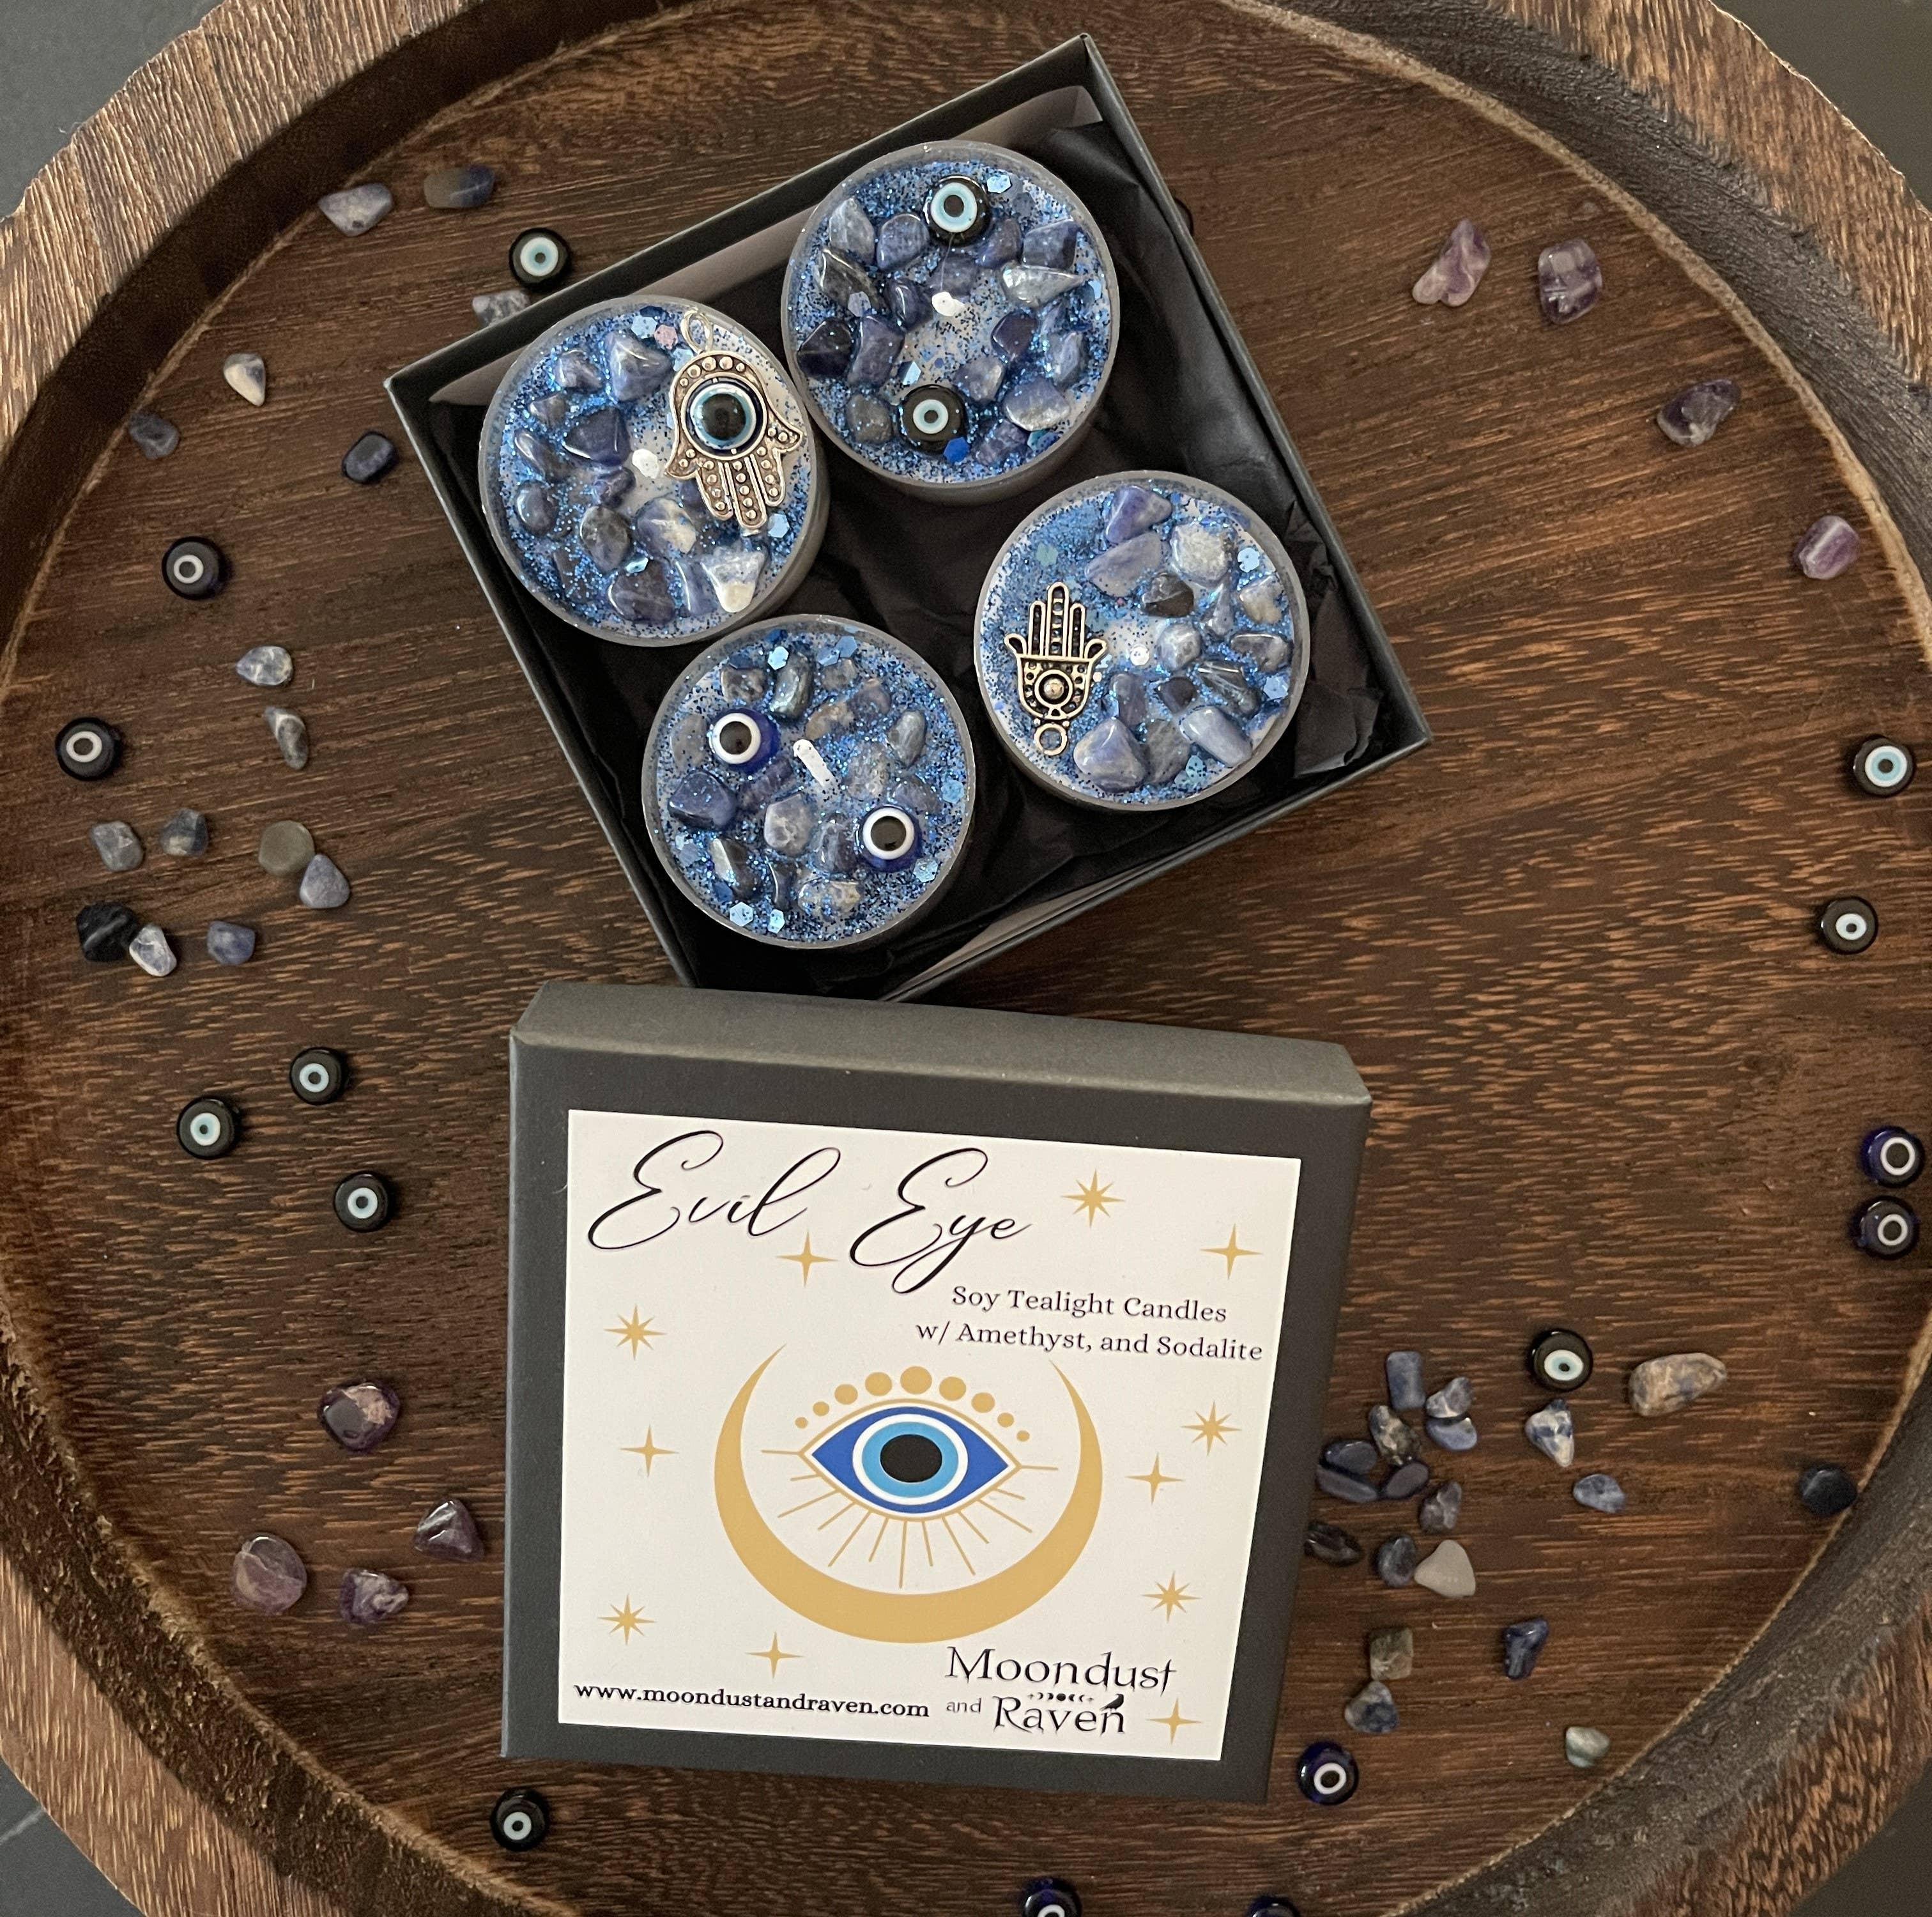 Evil Eye Tealight Crystal Candles, Ritual Candles - Classic Variable